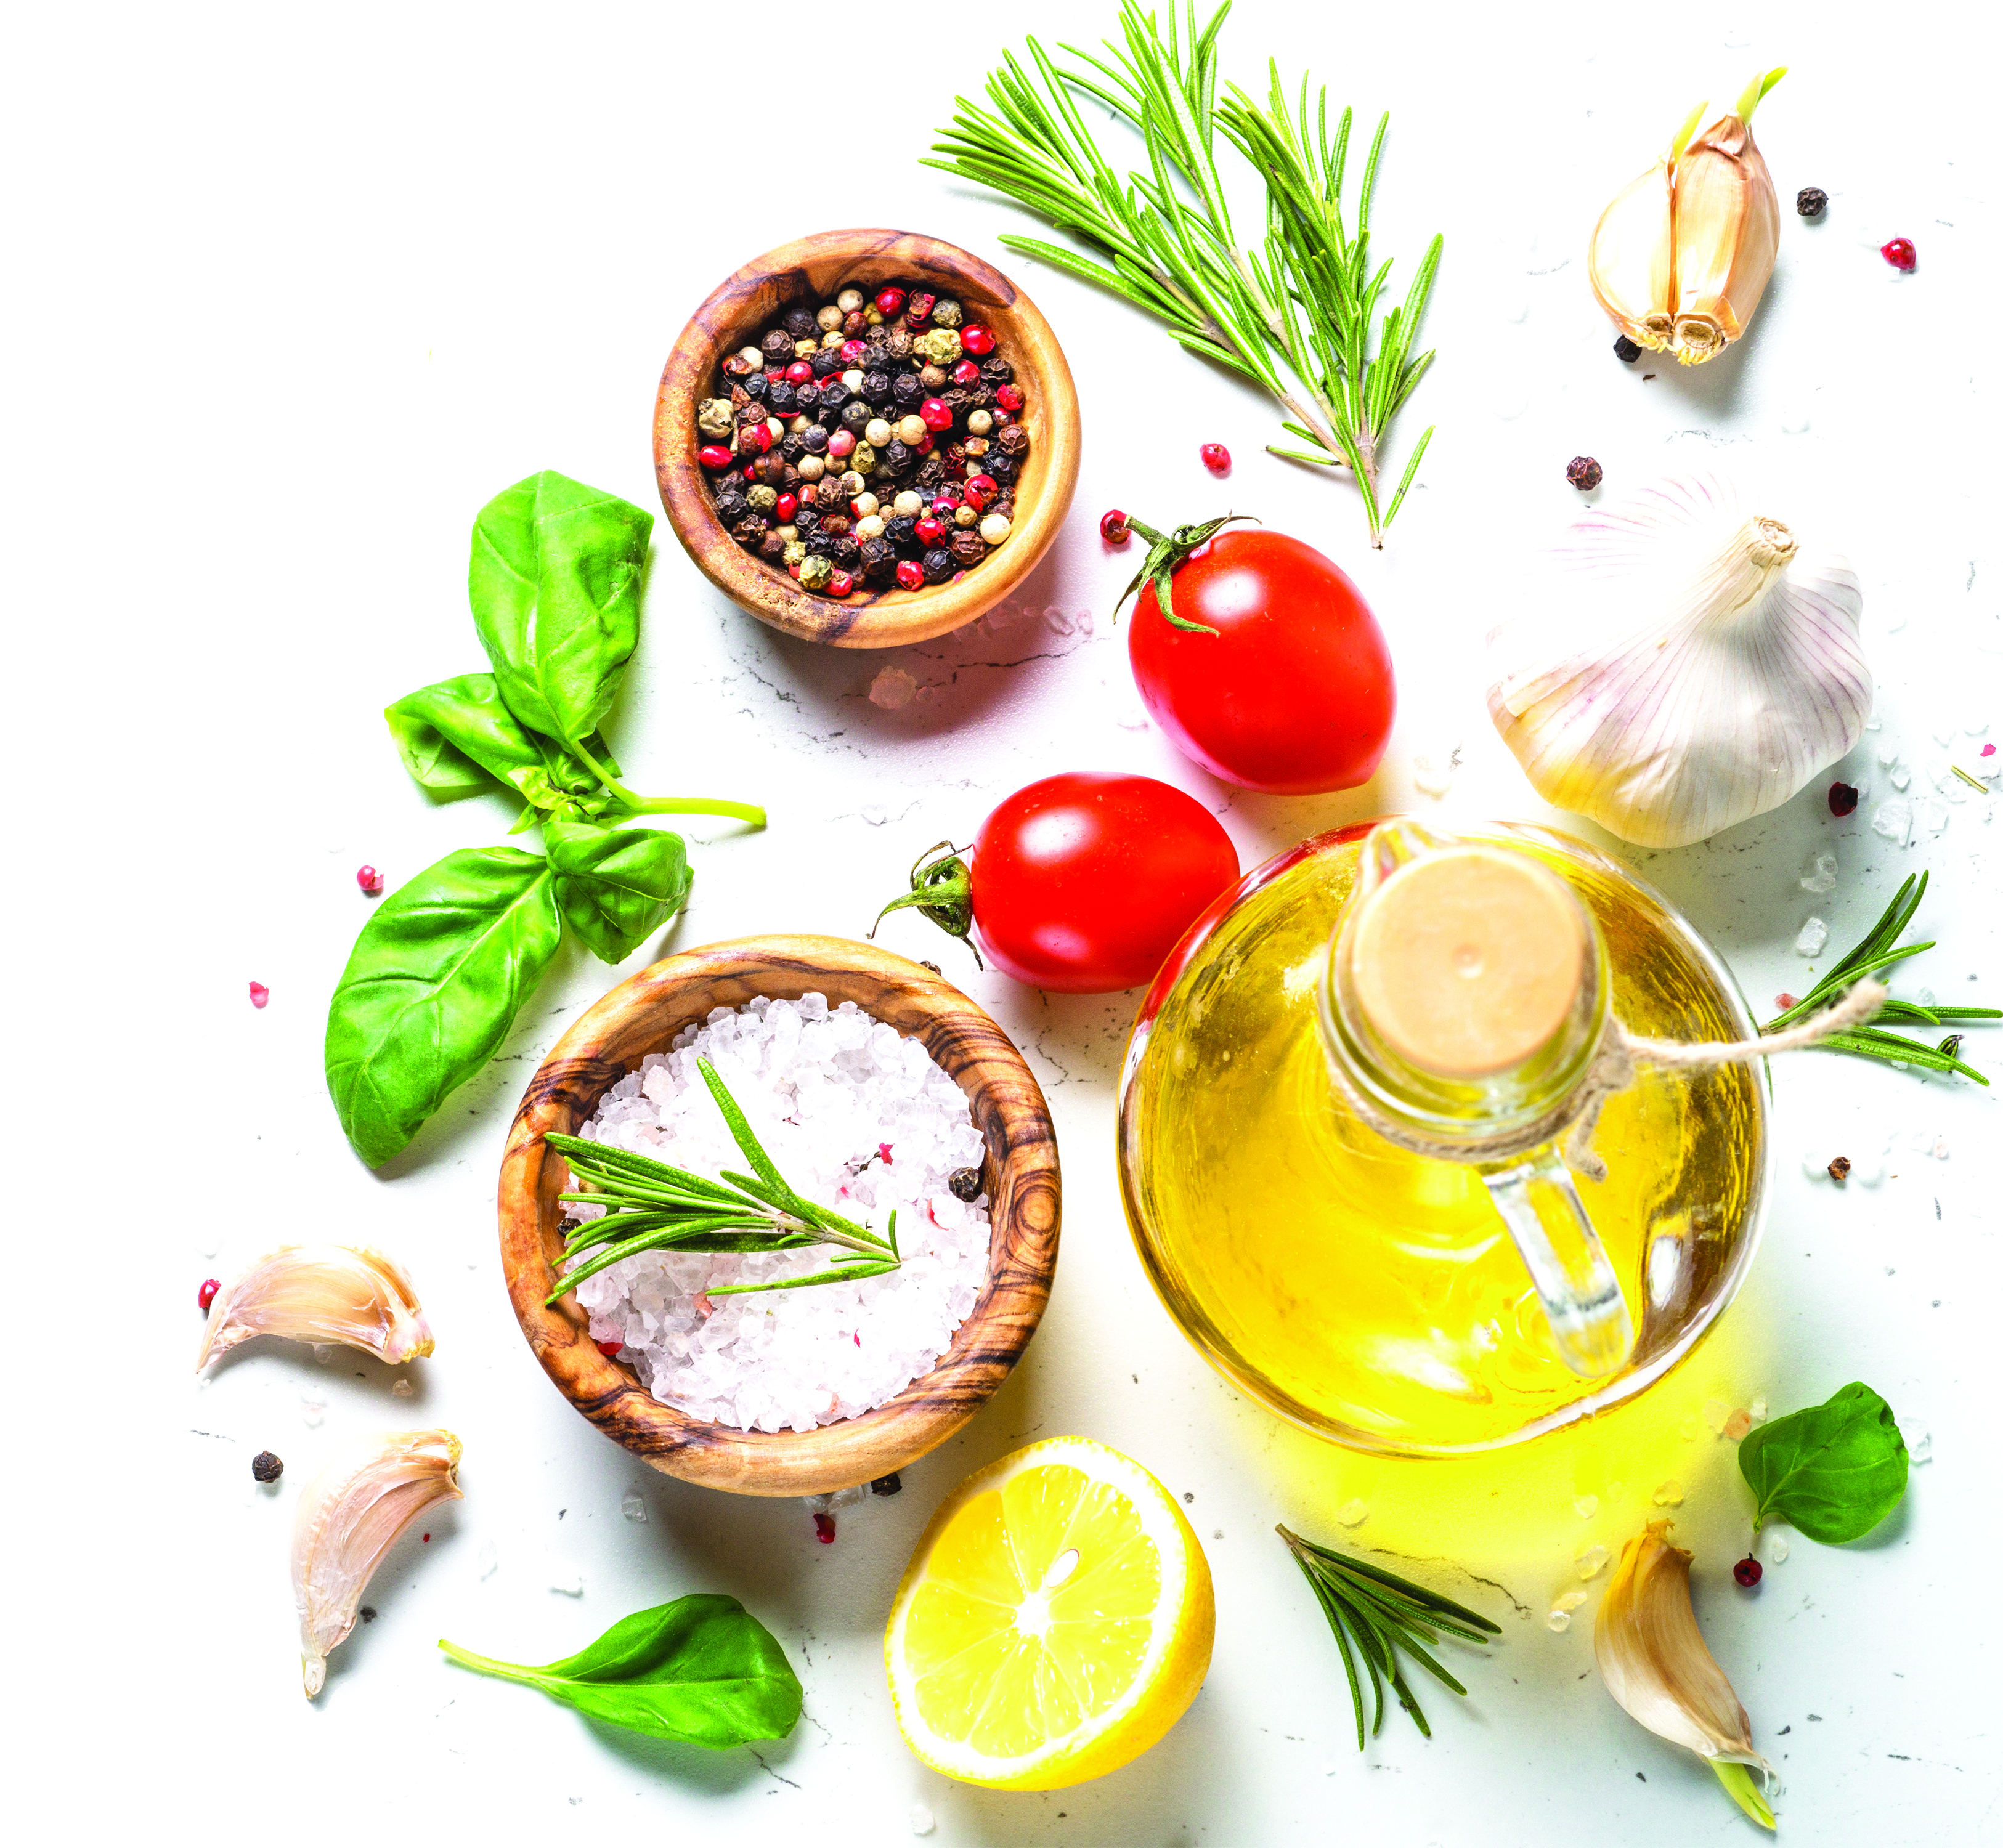 Olive oil and healthy foods